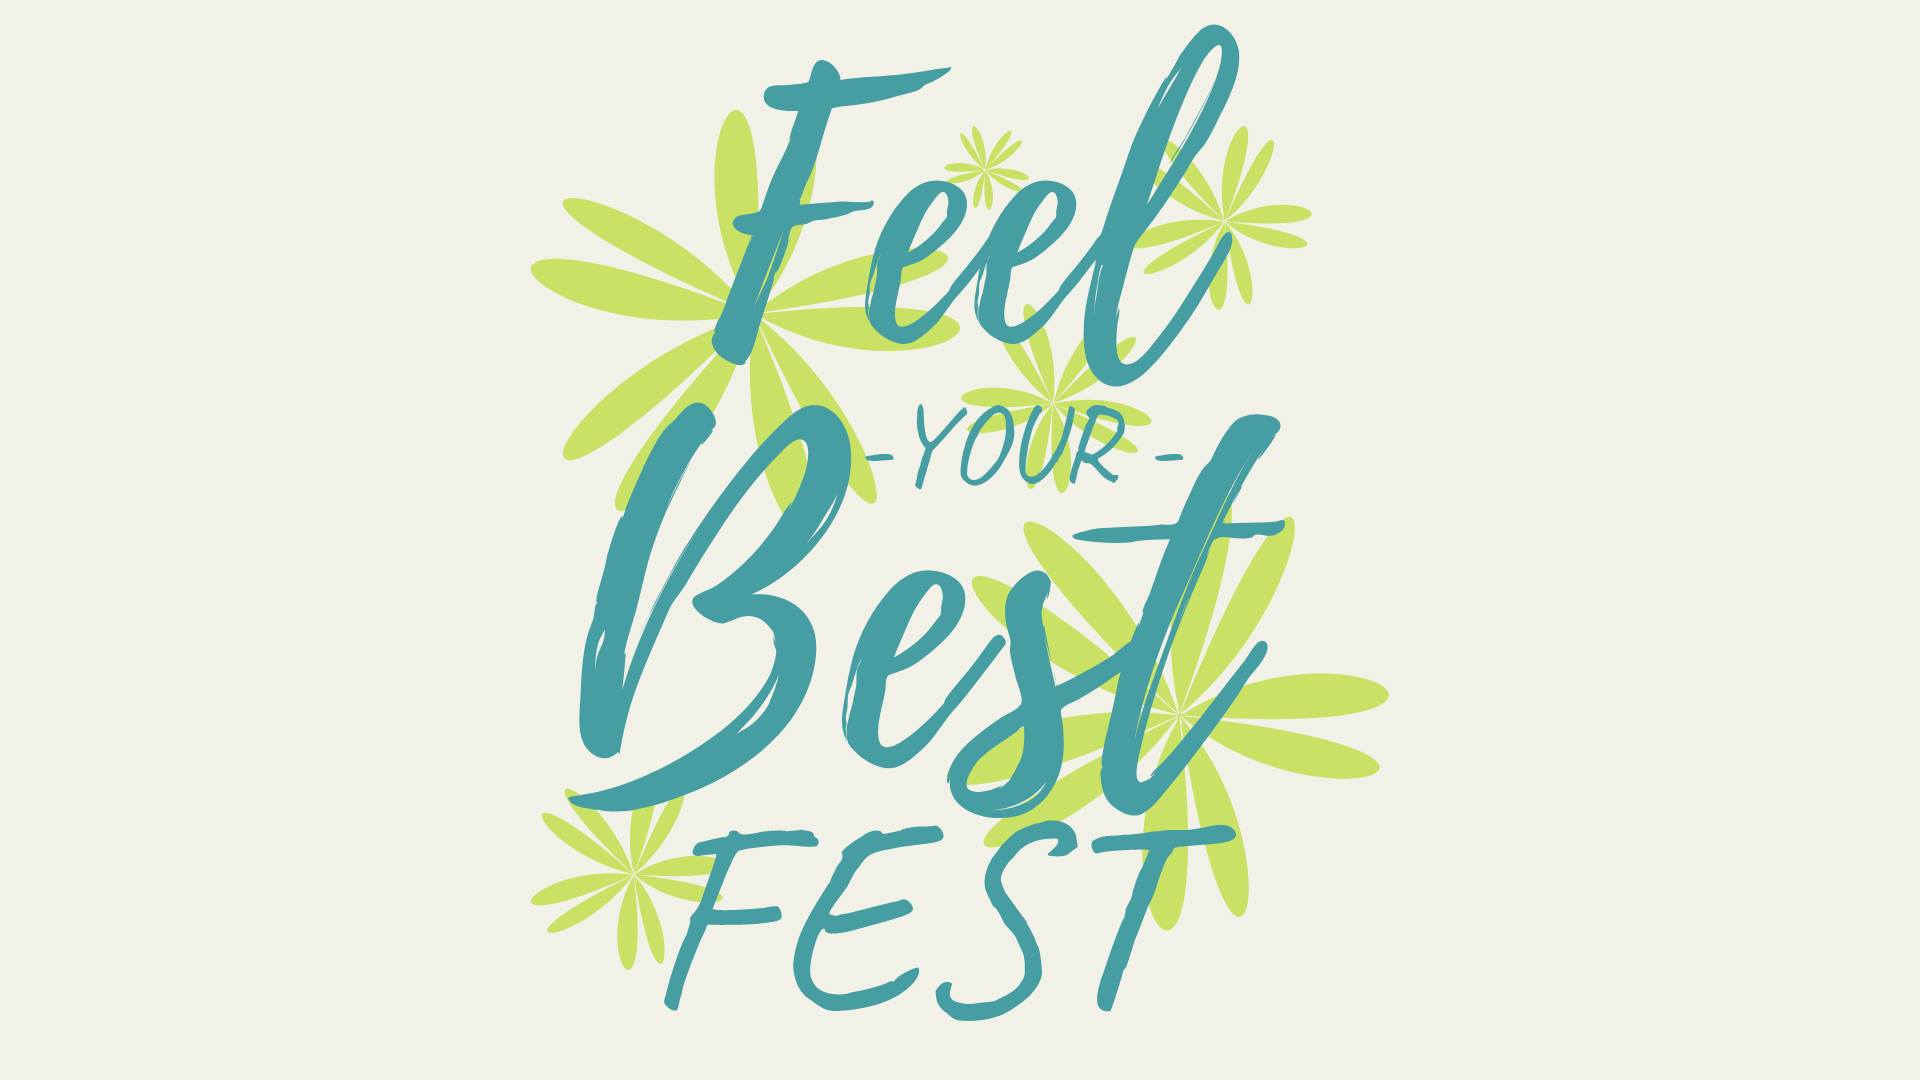 Meditation class with Pauline Stephens in Richmond, Virginia at Feel Your Best Fest